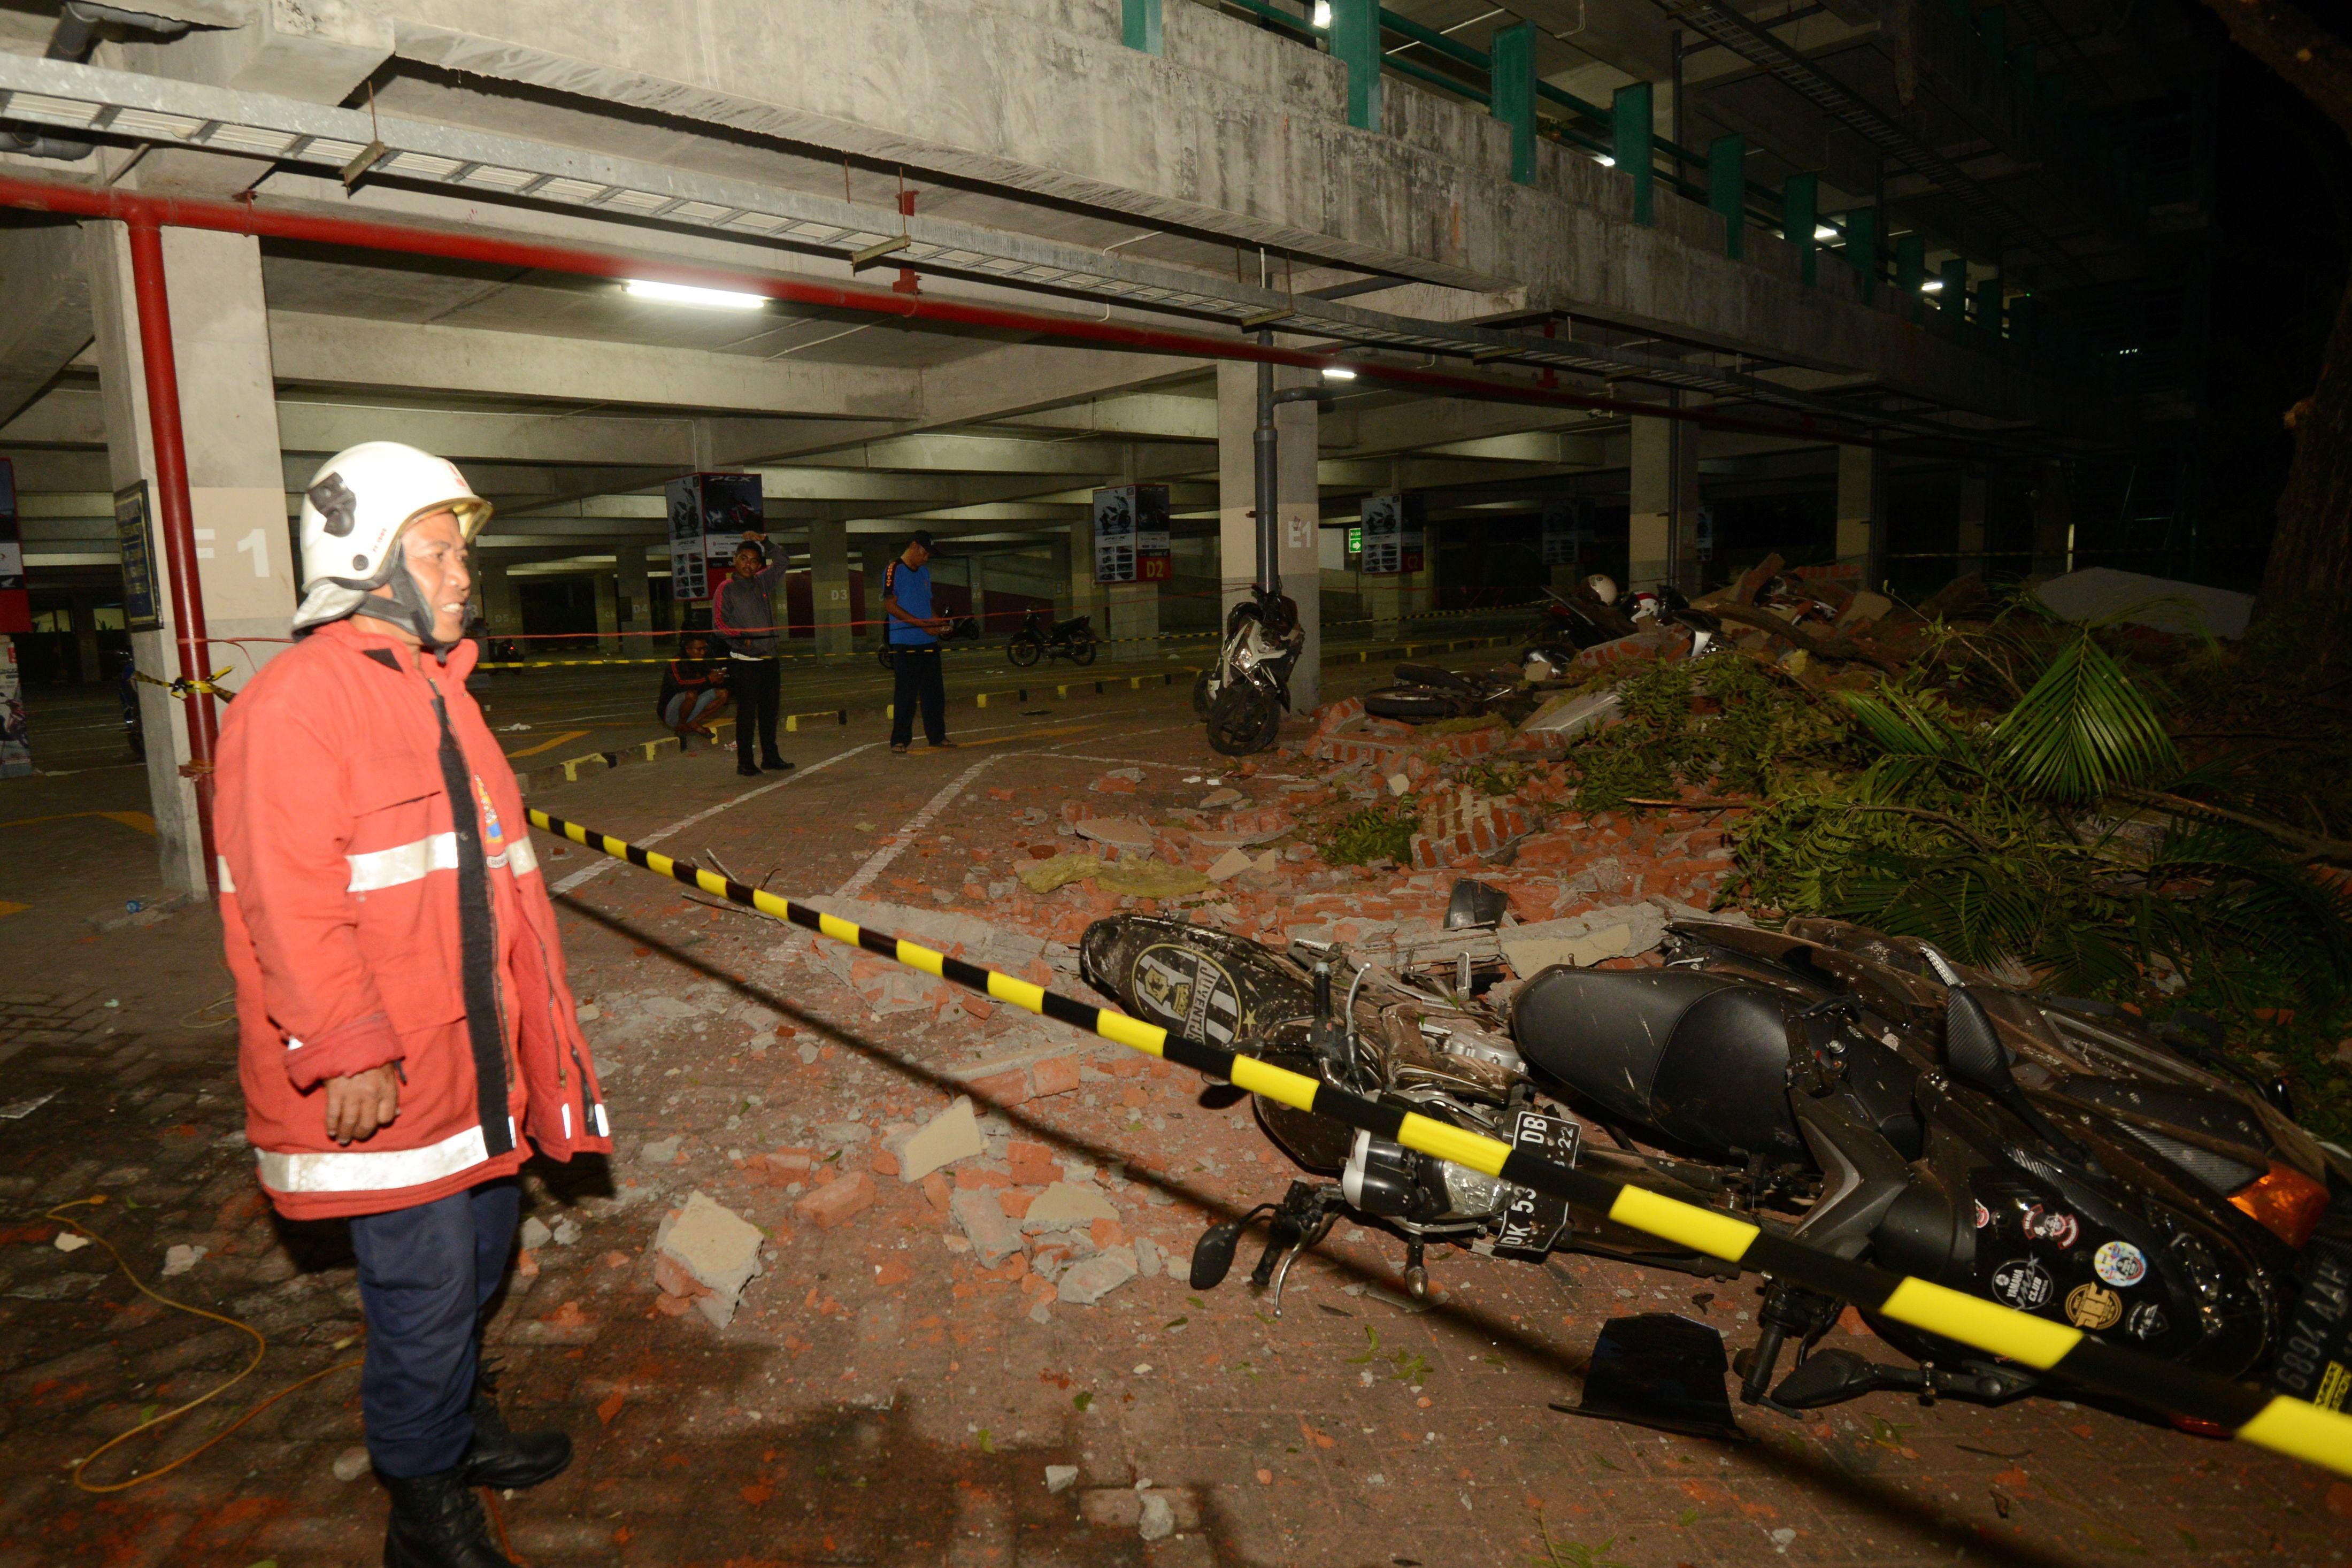 Rescue personnel stands next to a motorcycle that fell down at a mall in Bali's capital Denpasar on August 5, 2018 after a major earthquake rocked neighboring Lombok island. 